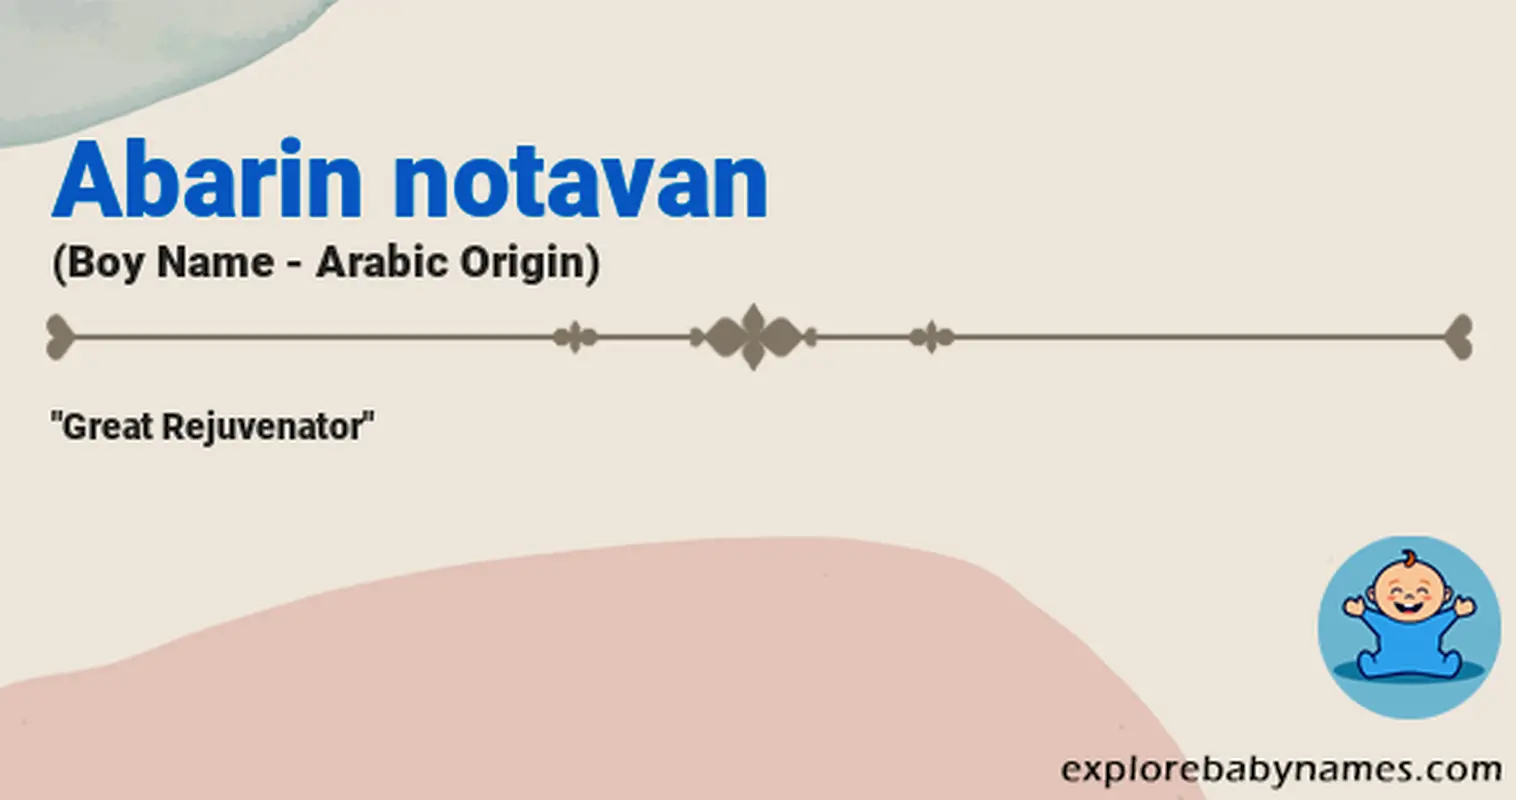 Meaning of Abarin notavan